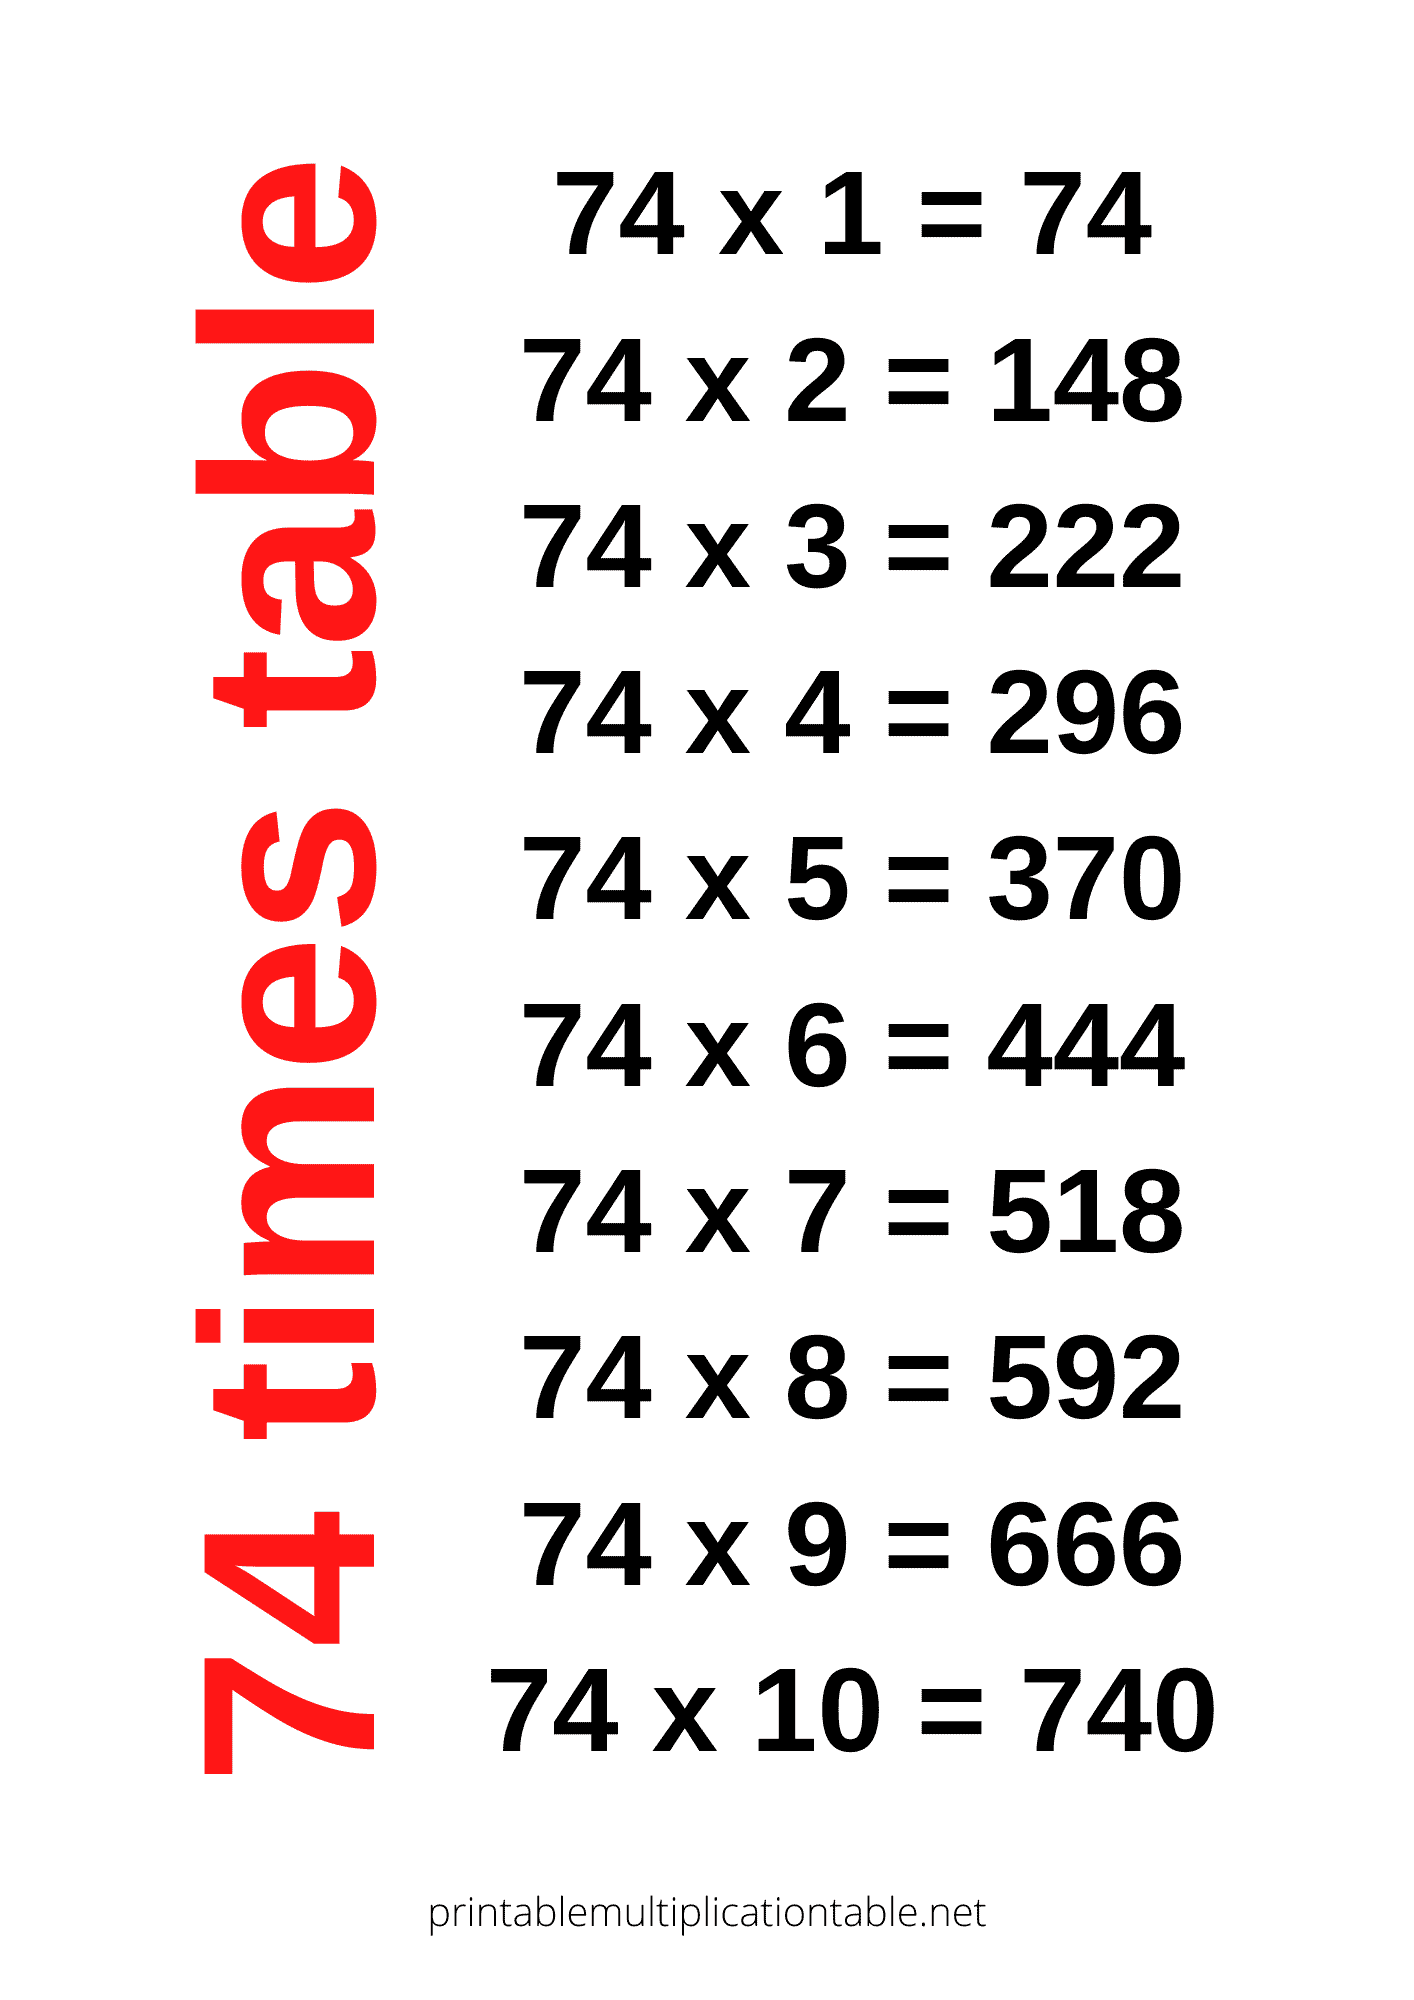 74 times table chart